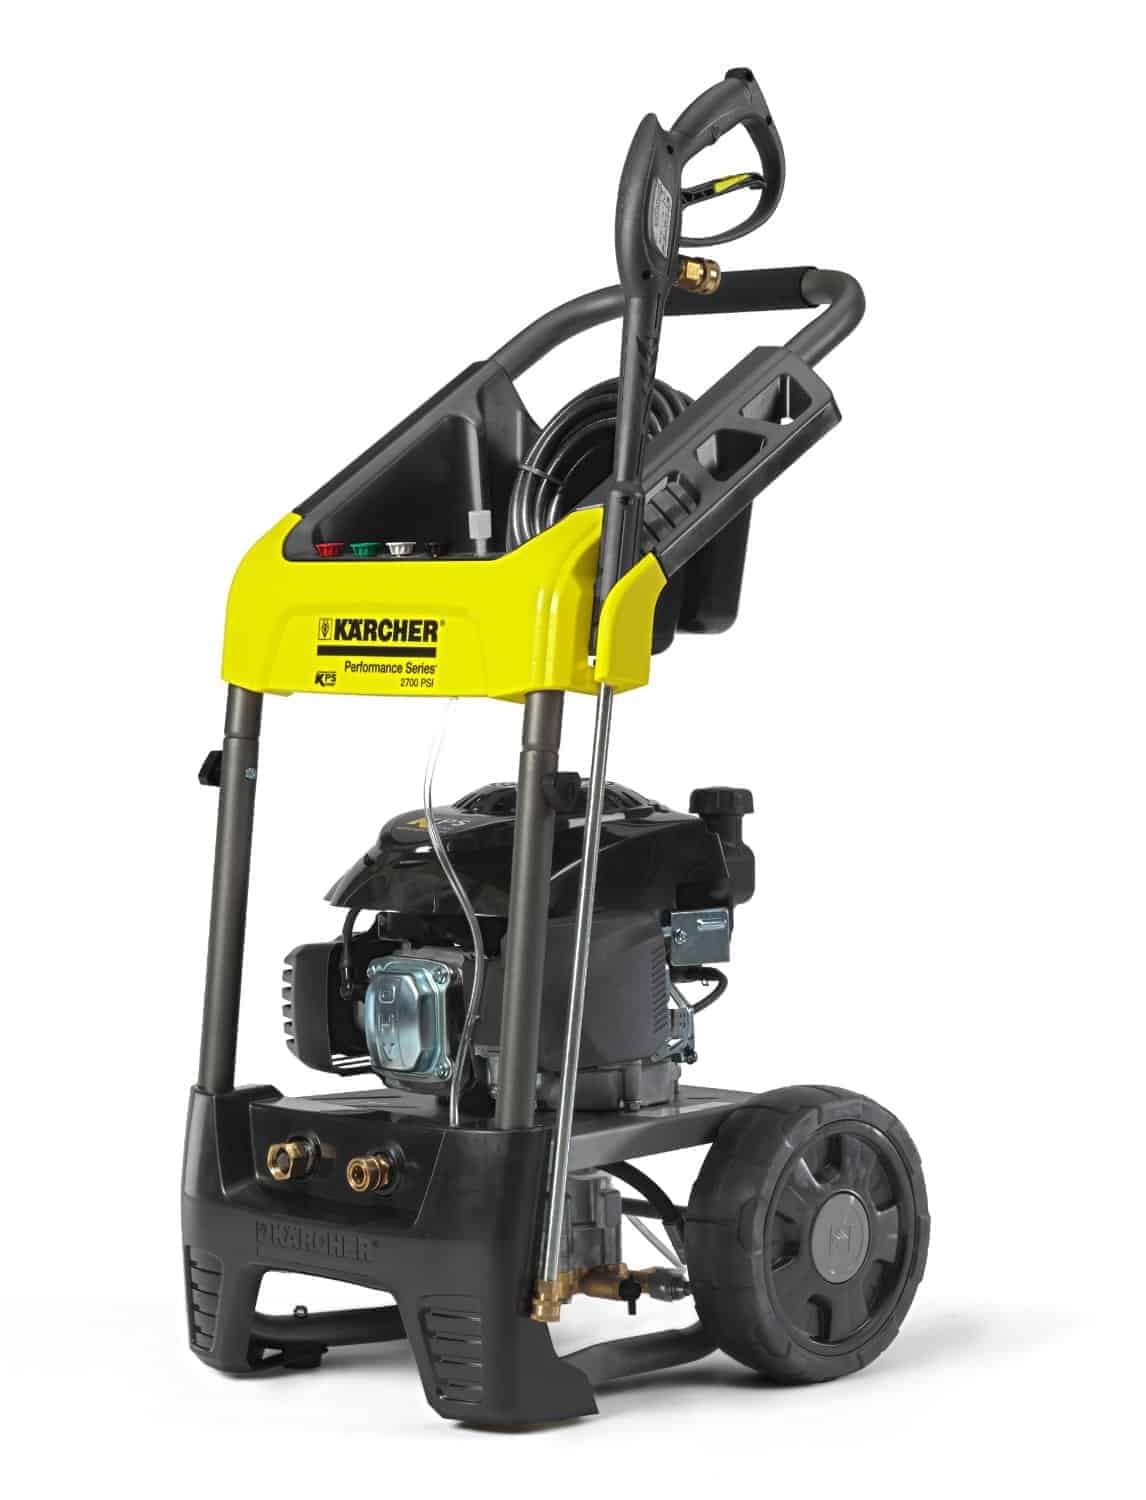 Karcher G 2700 DC Performance Series 2700PSI 2.4GPM Gas Pressure Washer review